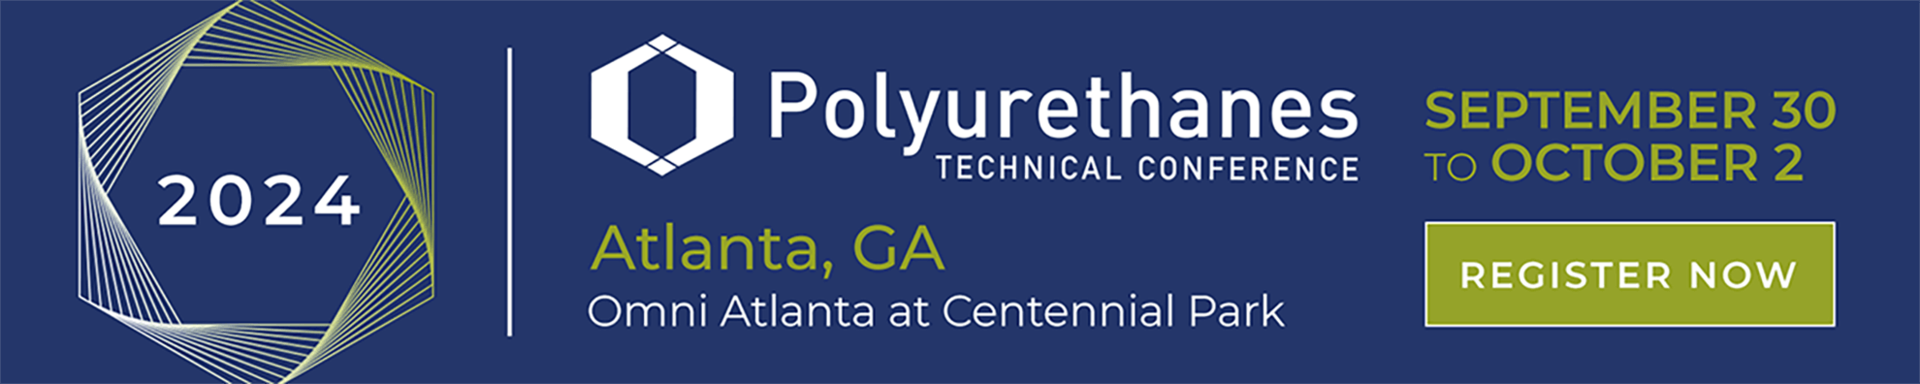 2024 PolyCon Banner with Registration